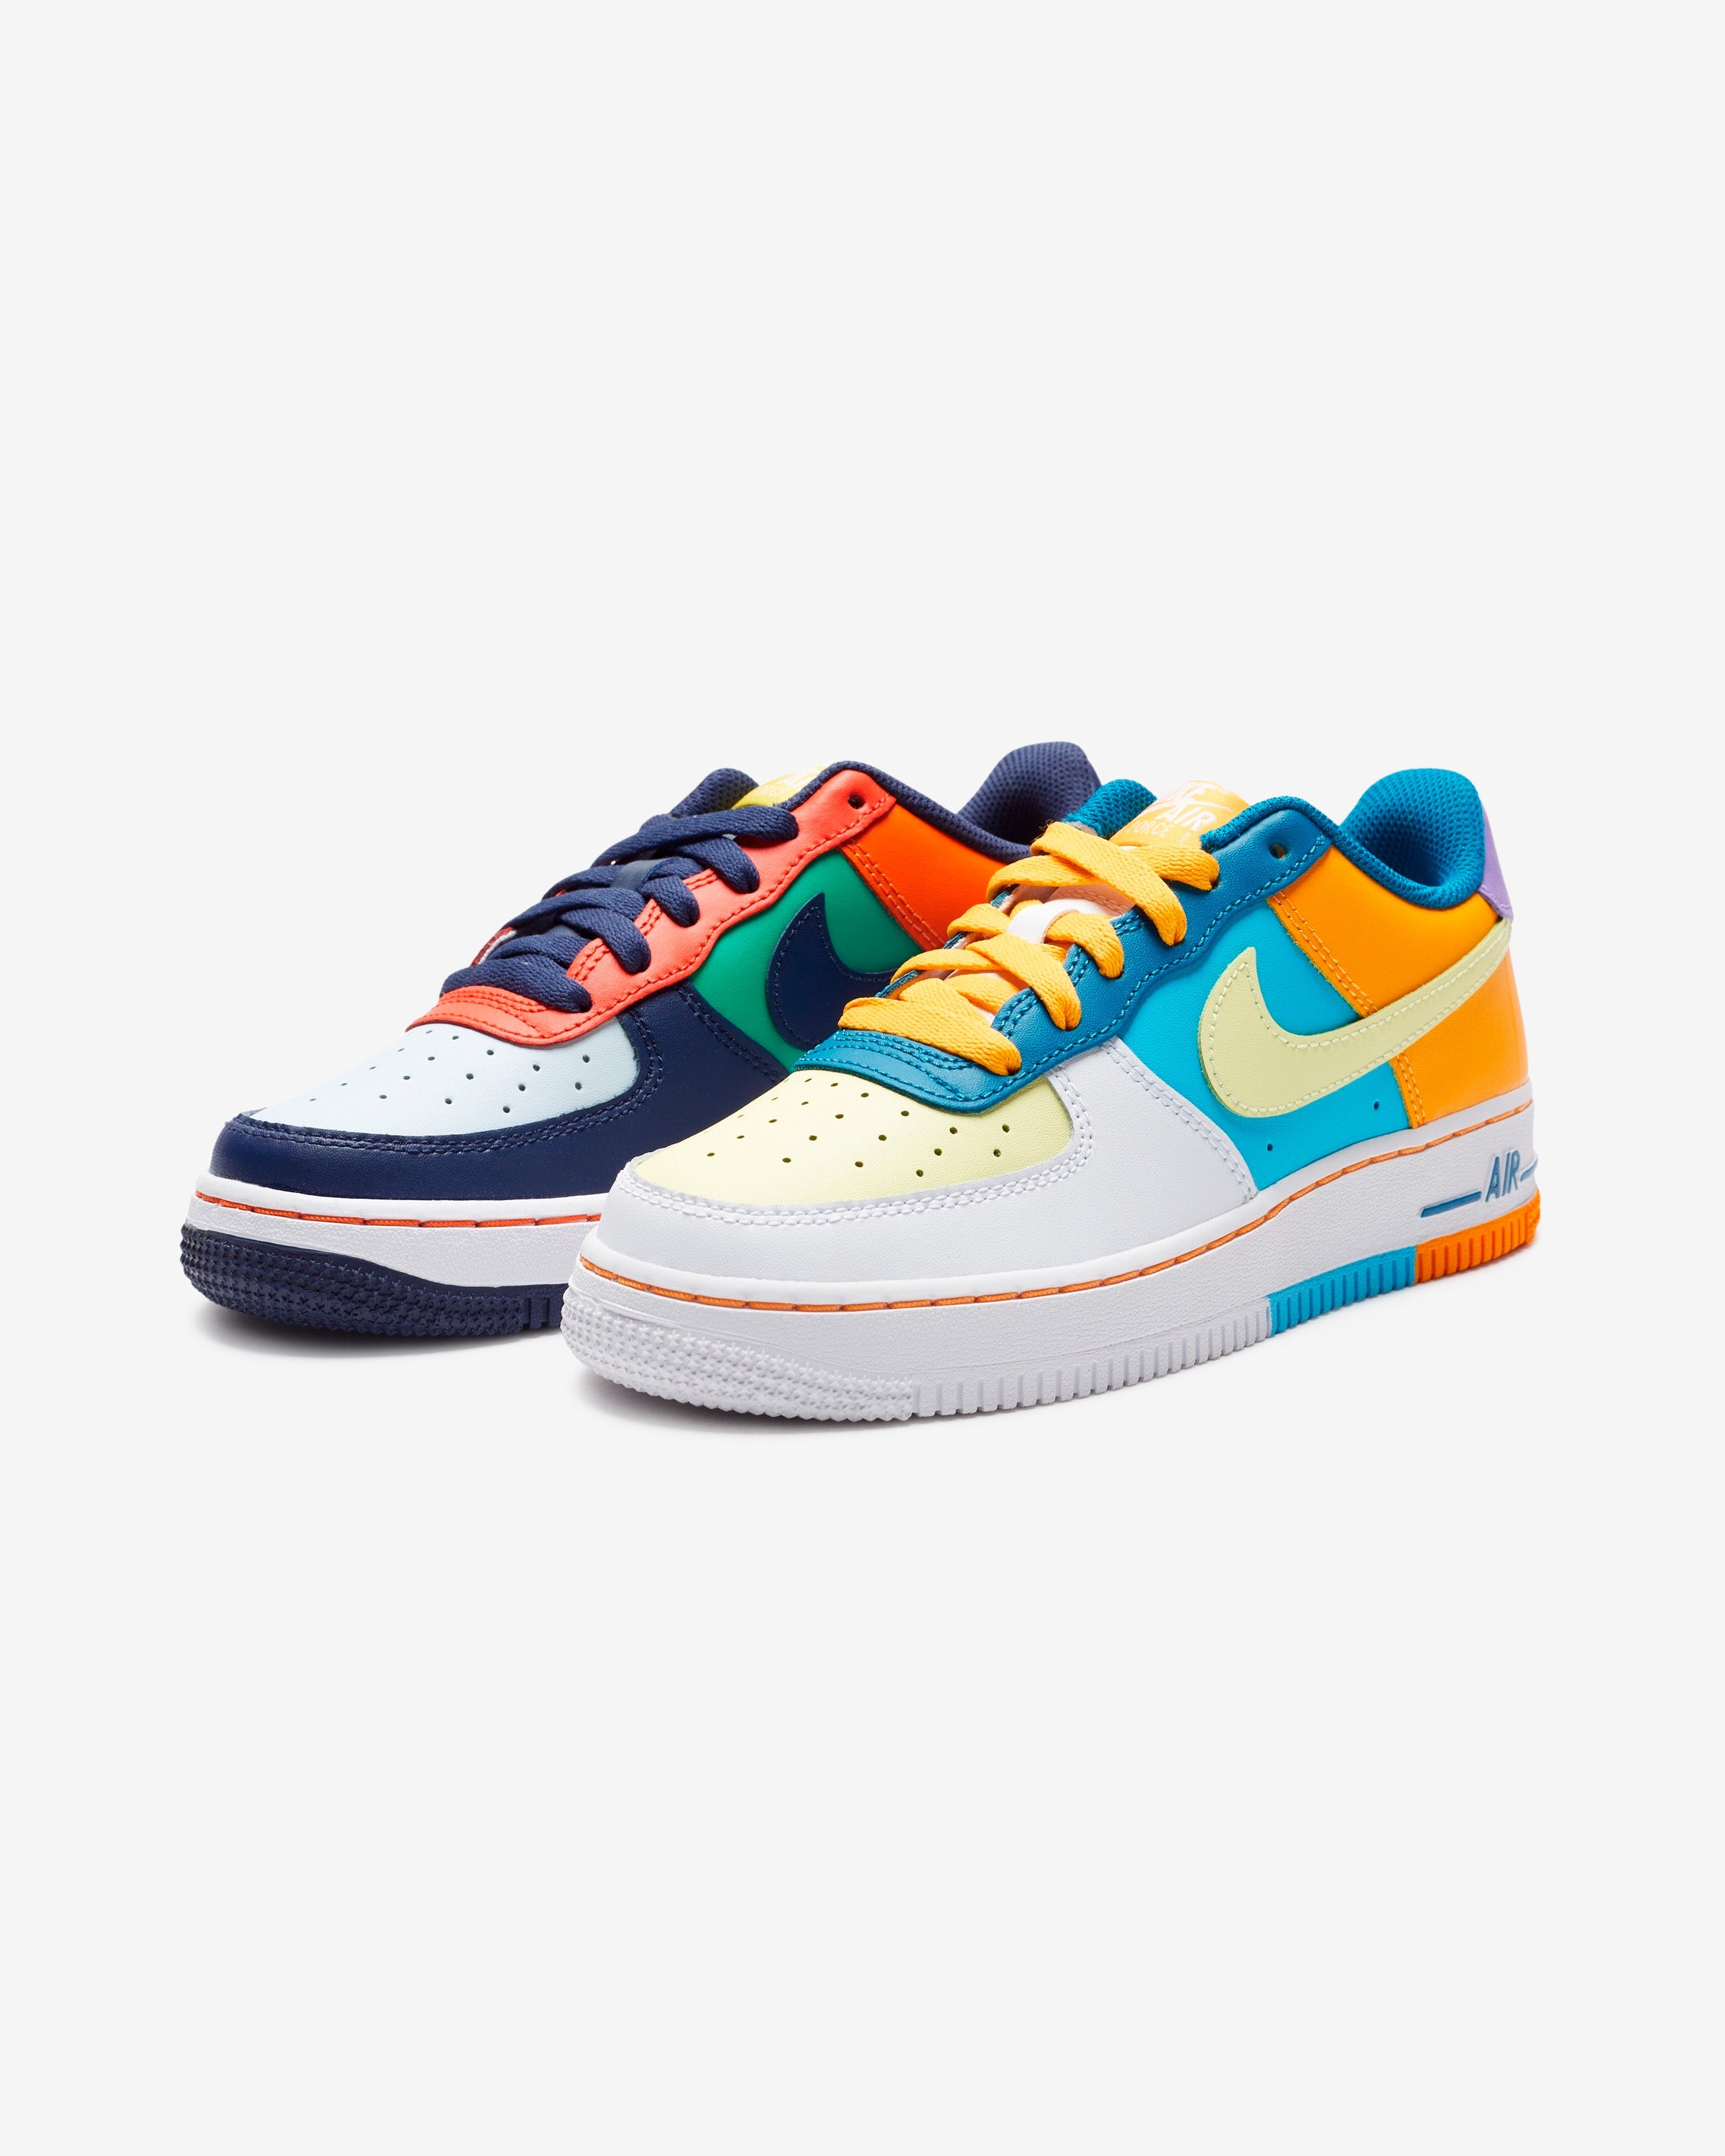 NIKE GS AIR FORCE 1 LV8 2 - MULTICOLOR